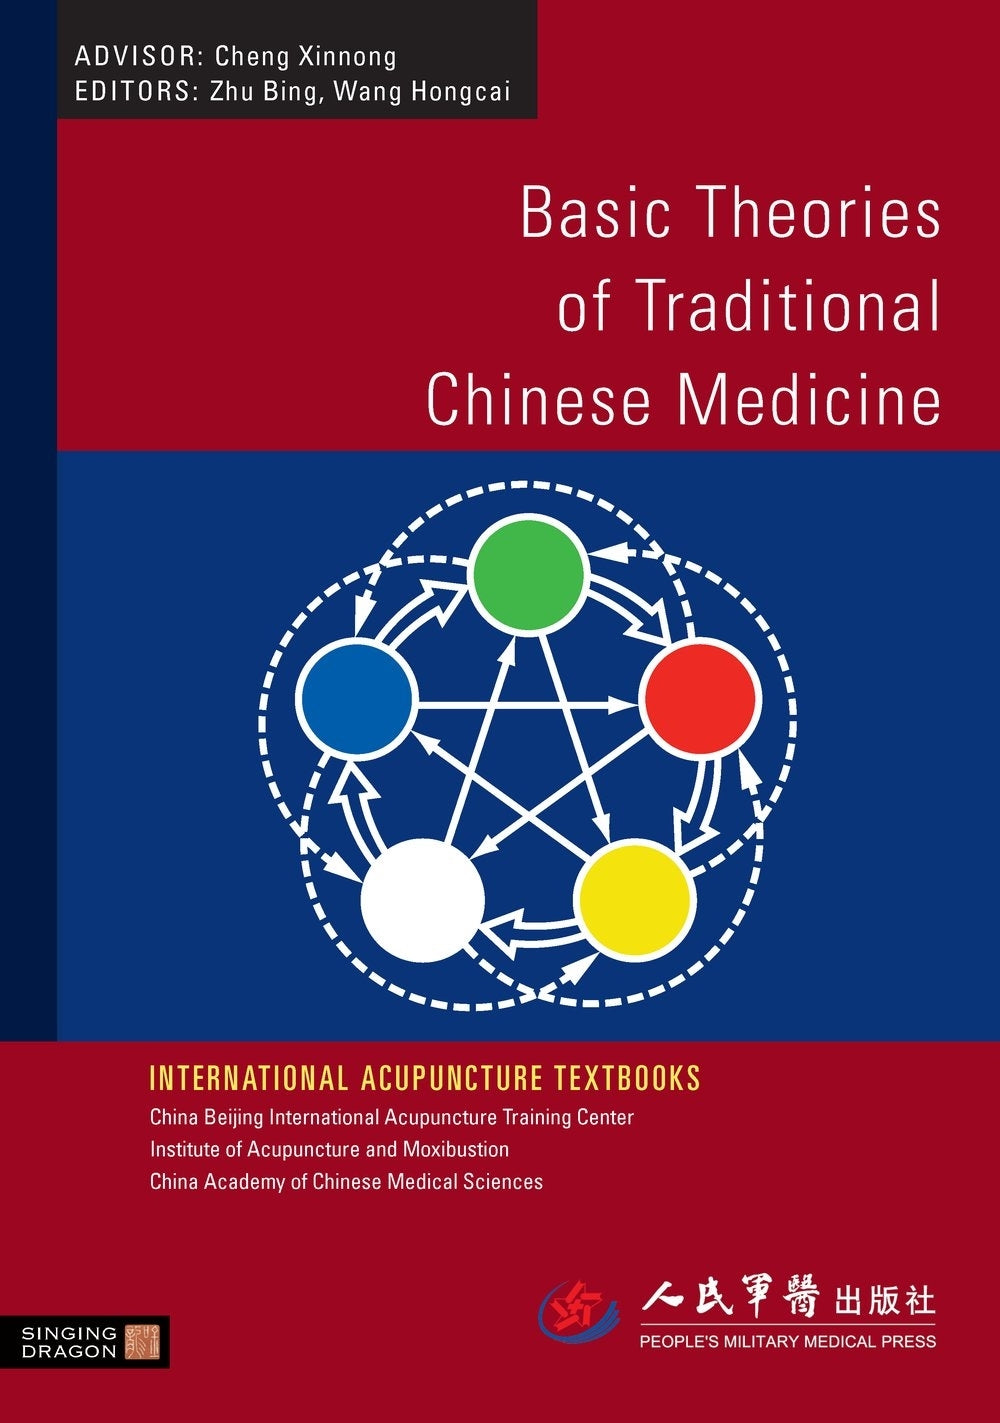 Basic Theories of Traditional Chinese Medicine by Hongcai Wang, Bing Zhu, No Author Listed